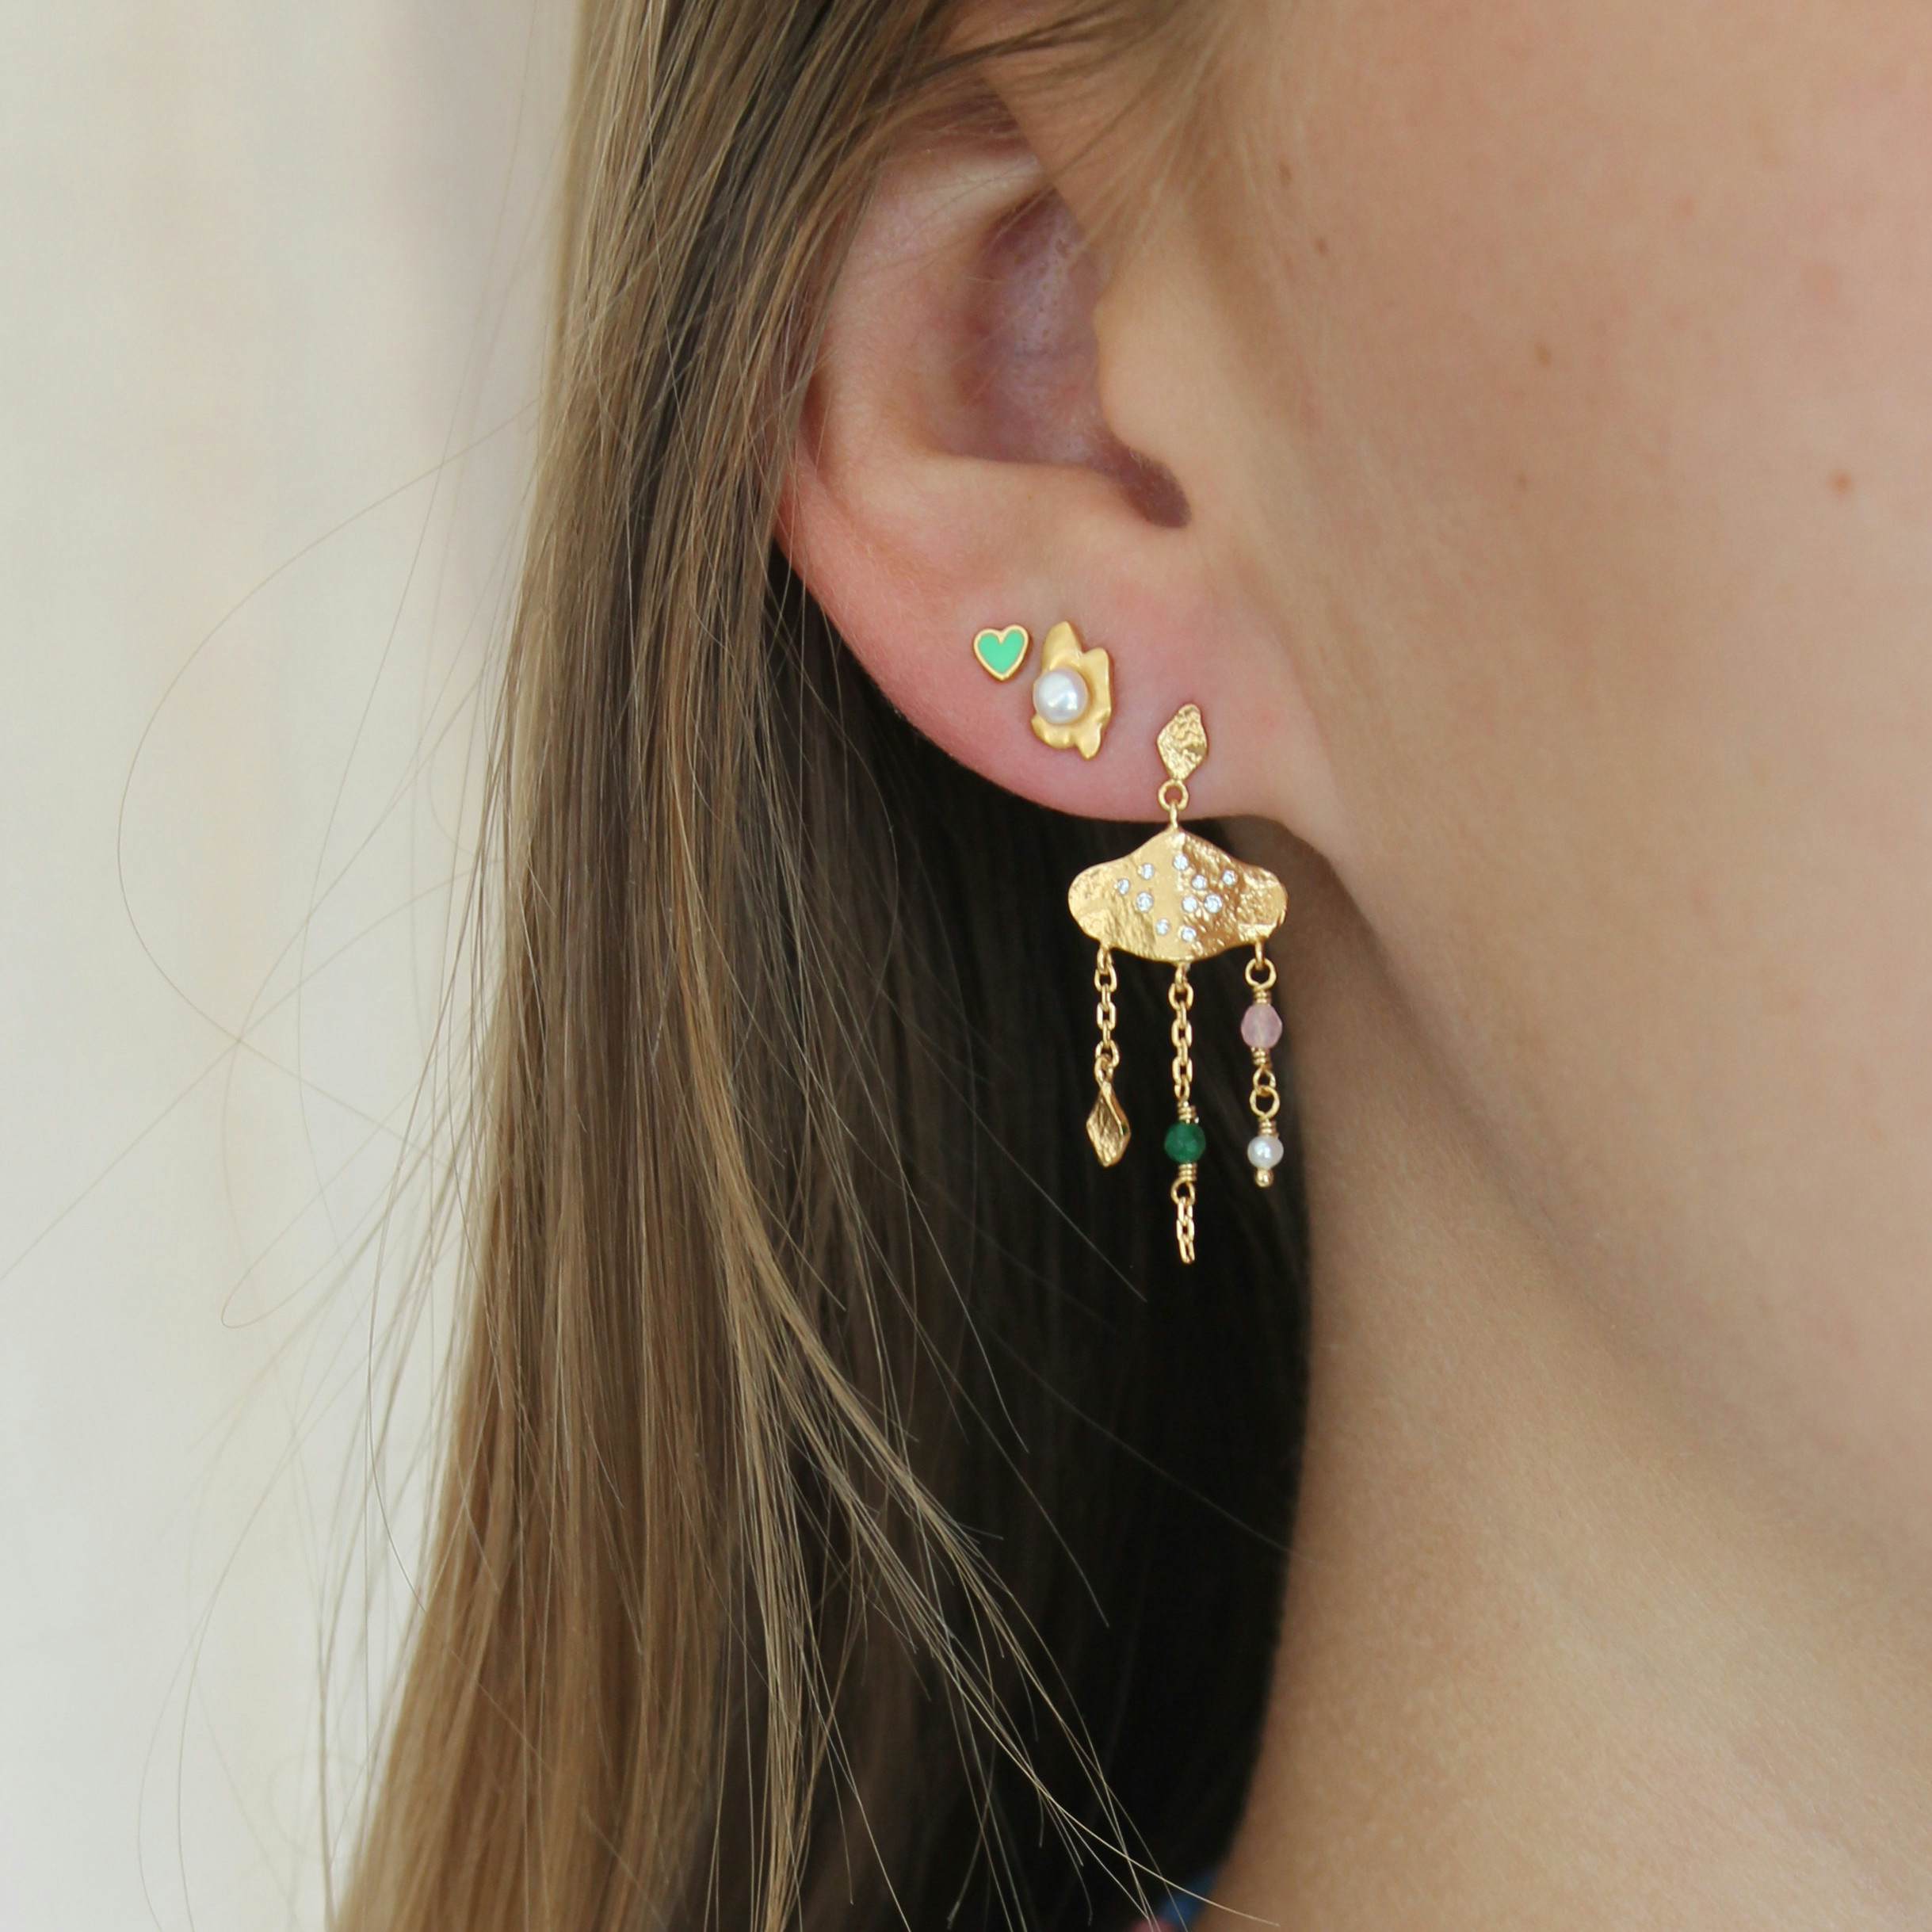 Ile De L'amour With Dancing Stones Earring from STINE A Jewelry in Goldplated-Silver Sterling 925